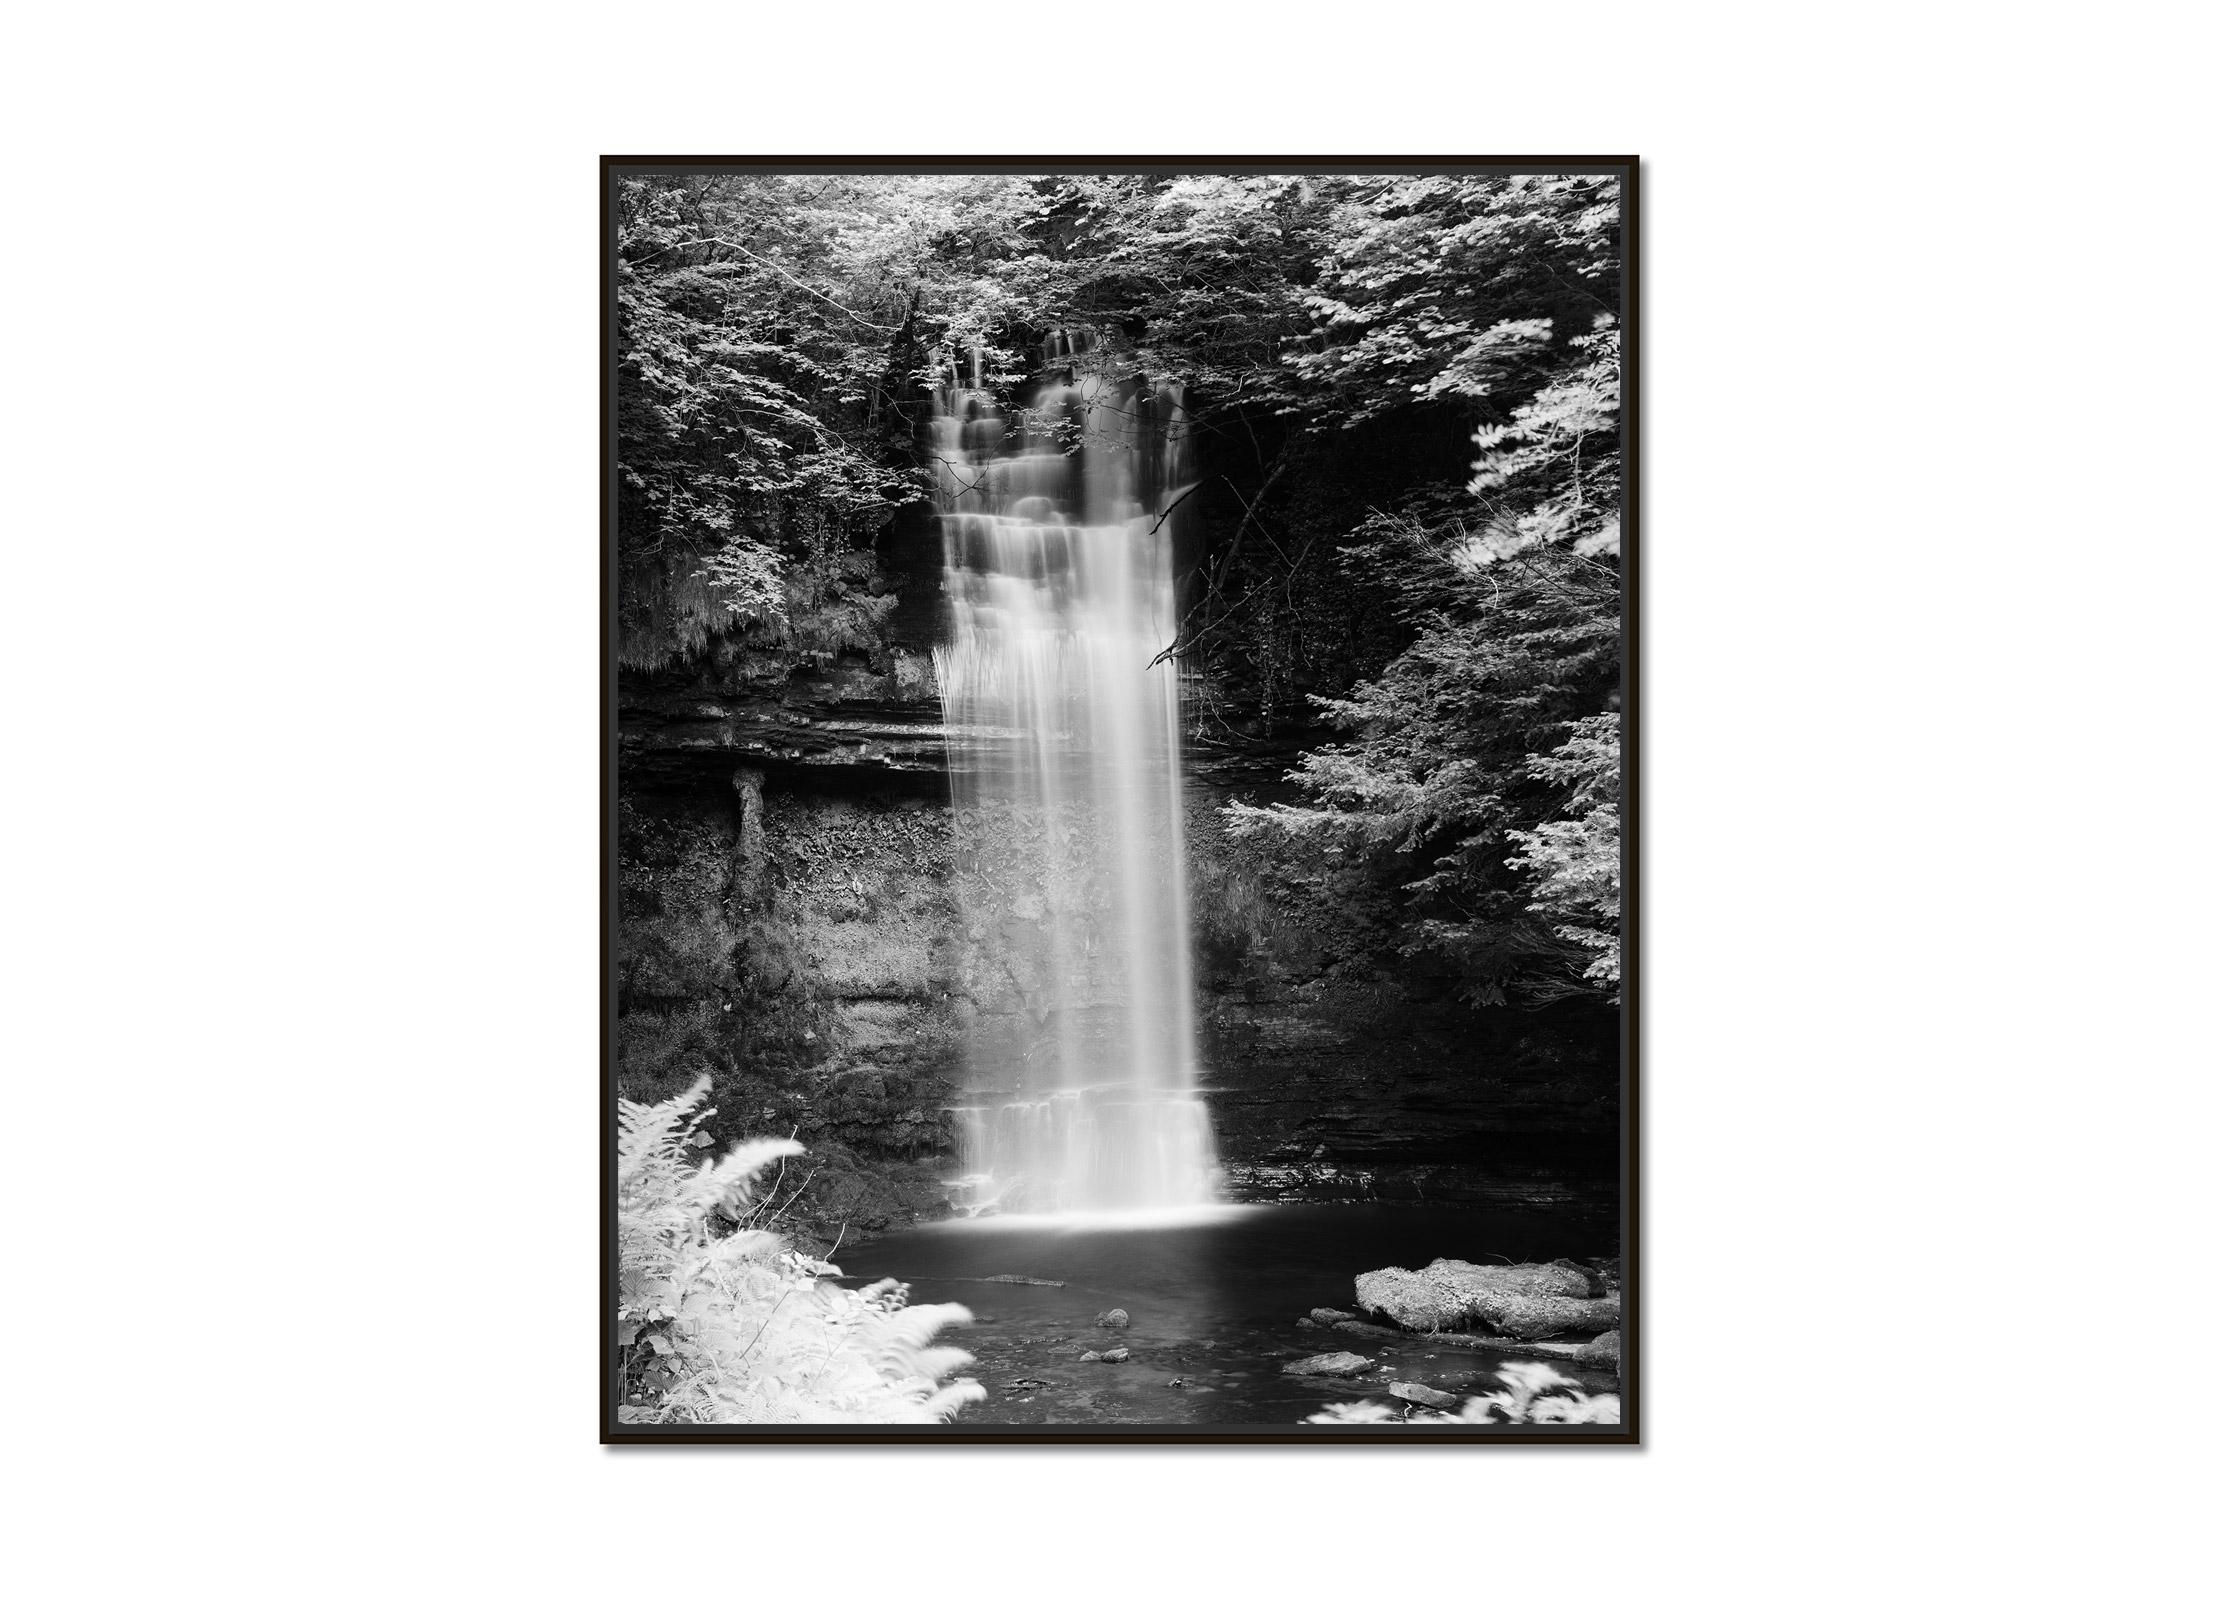 Waterfall, Ireland, black and white photography, waterscape, long exposure, art - Photograph by Gerald Berghammer